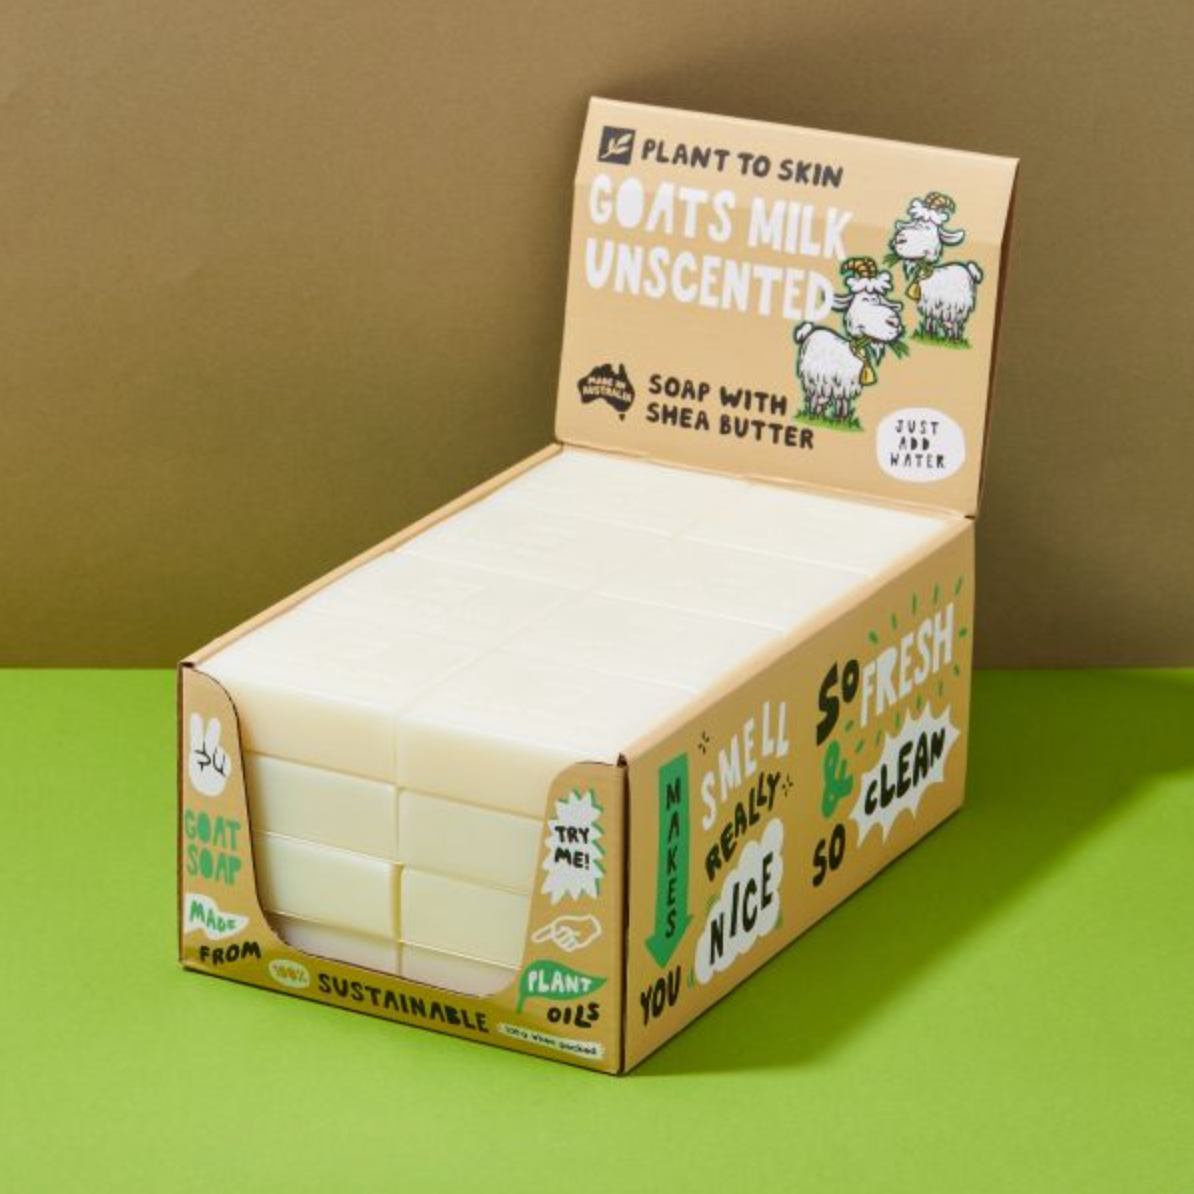 Plant to Skin Goats Milk Unscented Soap 32x100g Carton